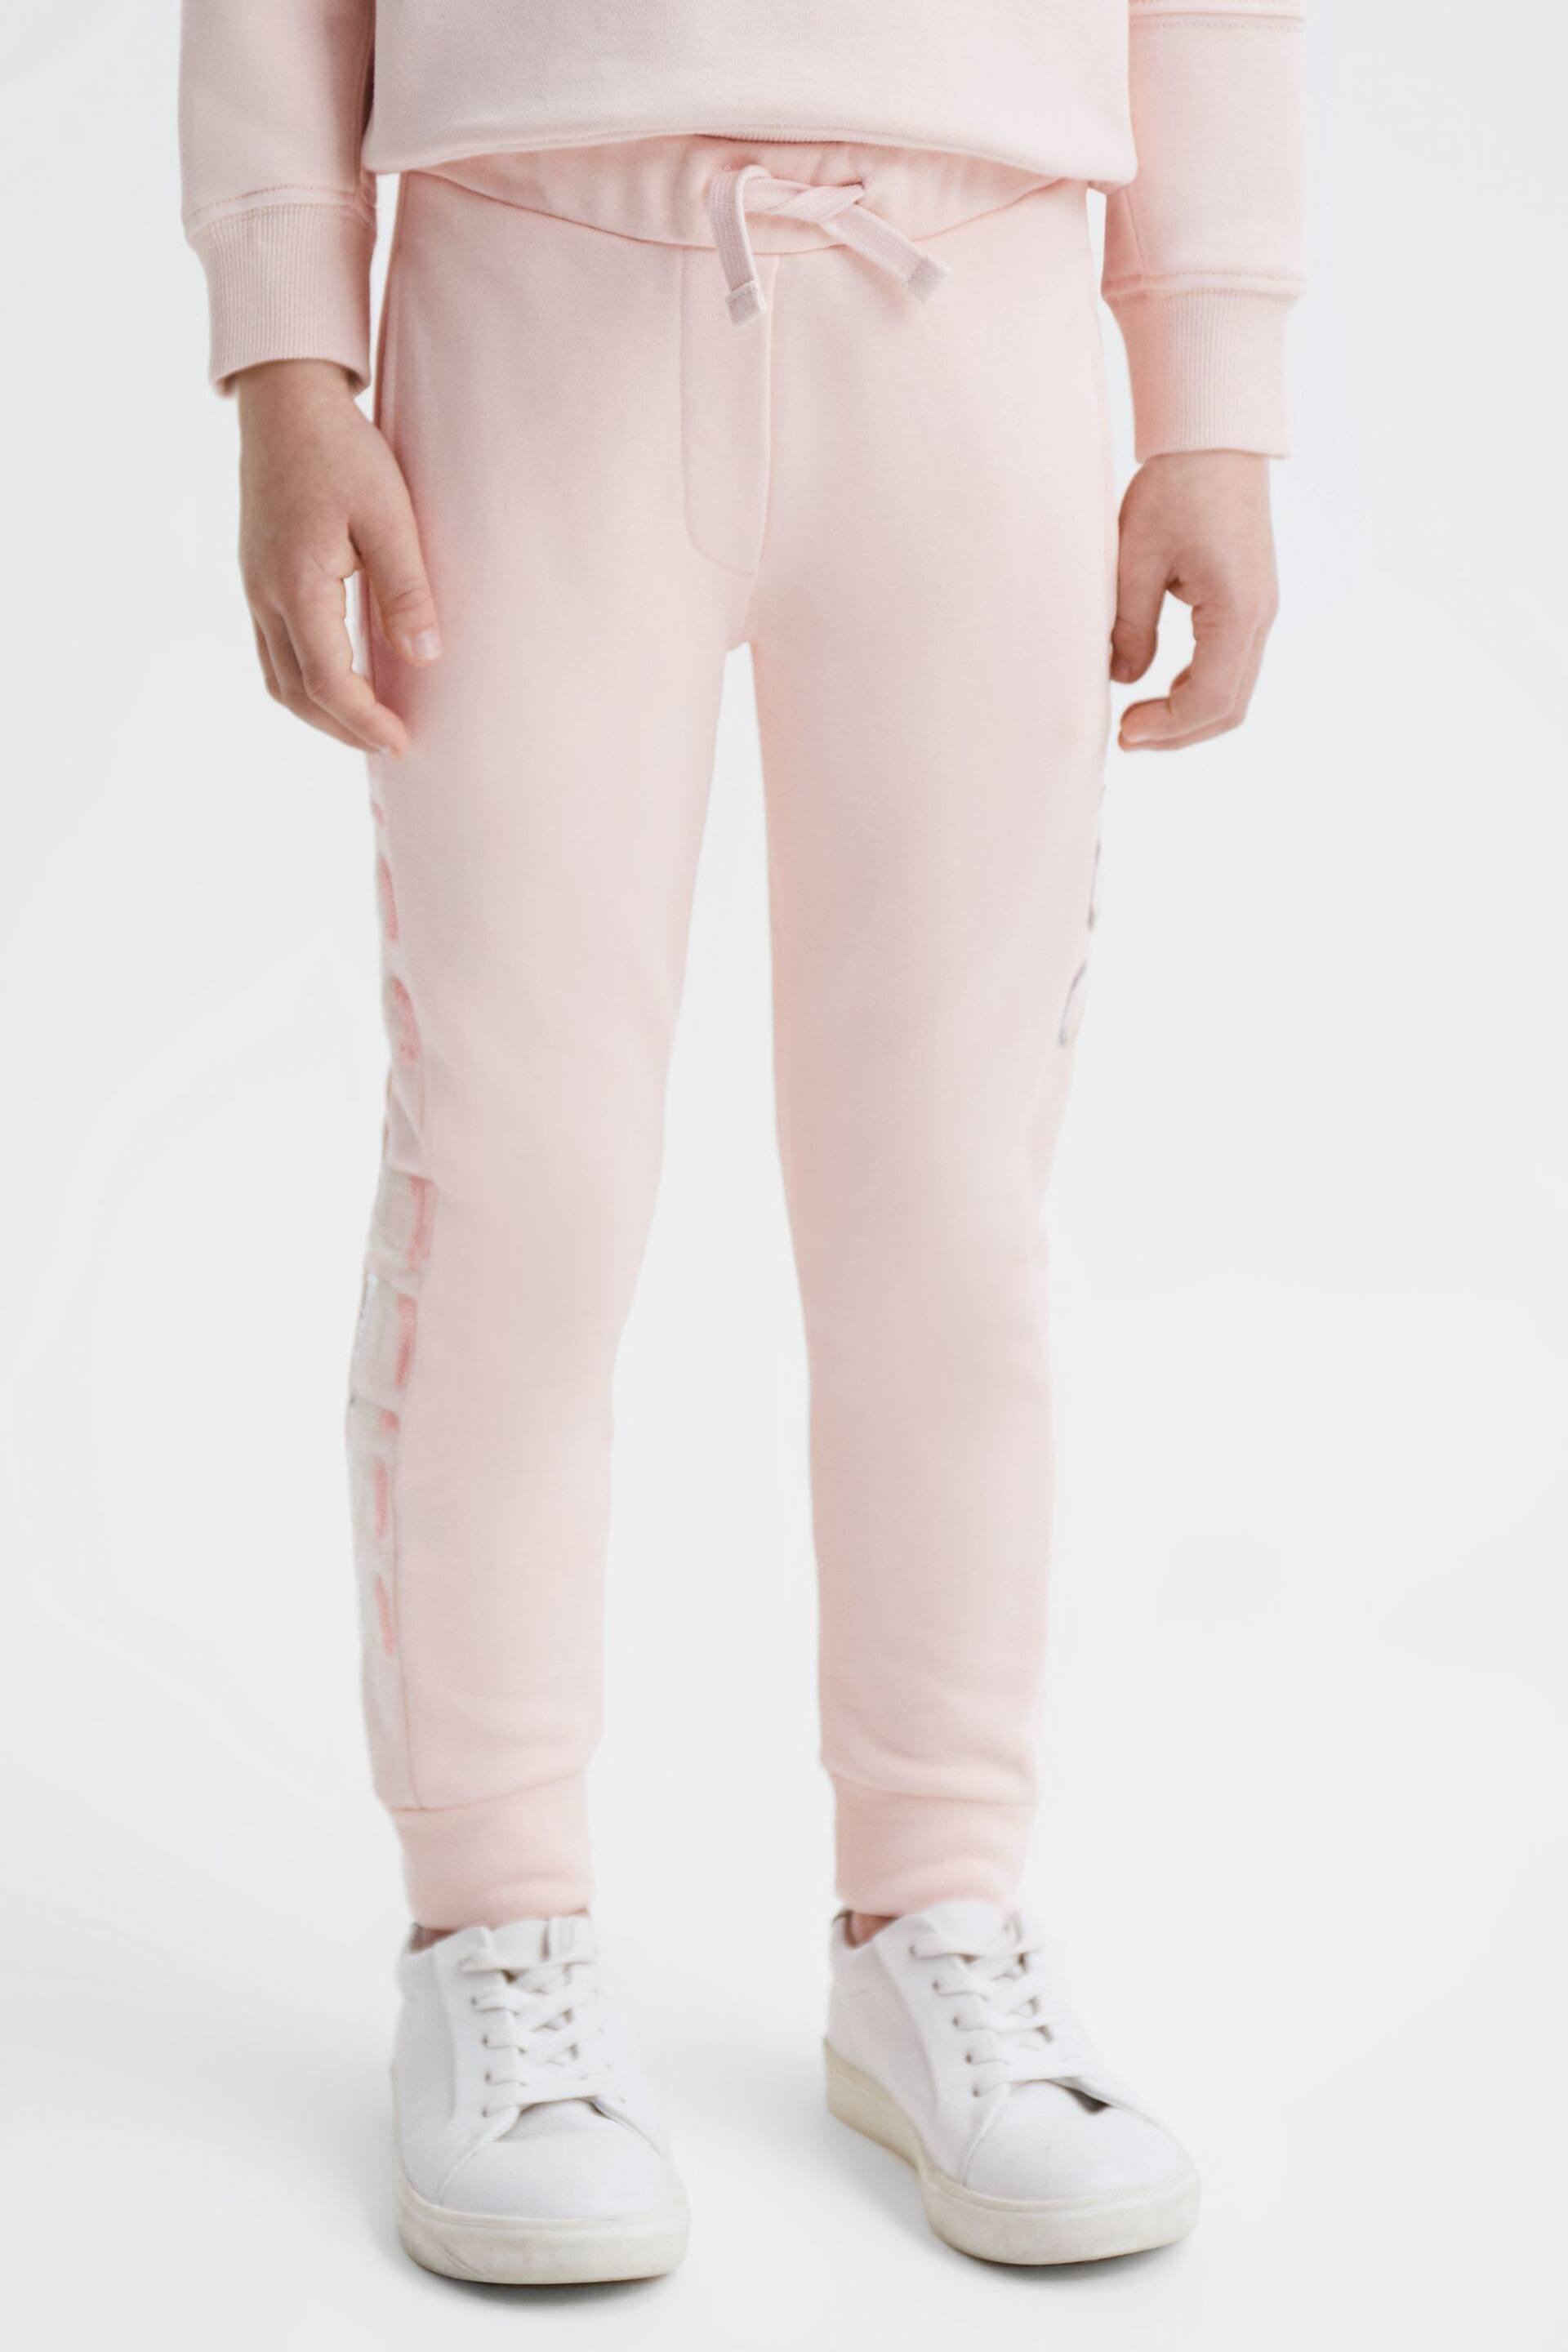 Reiss Soft Pink Maria Senior Sequin Joggers - Image 1 of 6